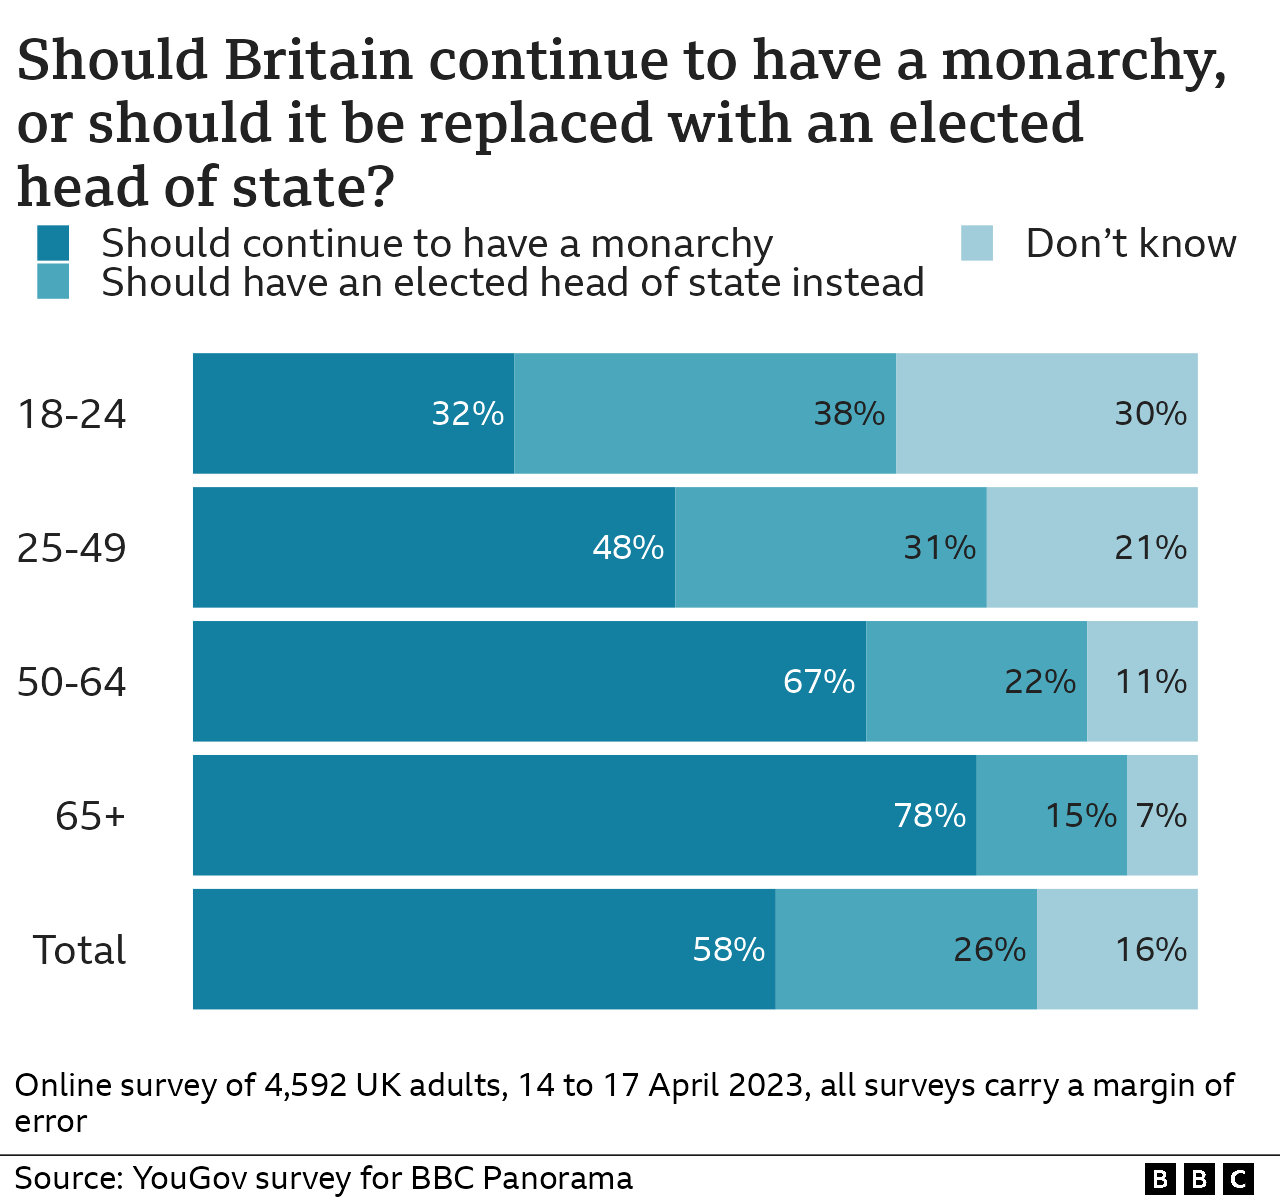 Graphic showing results from Panorama's YouGov poll asking the question: Should Britain continue to have a monarch, or should it be replaced with an elected head of state? (18-24 year olds - 32% monarchy, 38% elected head of state; 25-49 year olds - 48% monarchy, 31% elected head of state; 50-64 year olds - 67% monarchy, 22% elected head of state; 65+ - 78% monarchy, 15% elected head of state; all ages together - 58% monarchy, 26% elected head of state.)